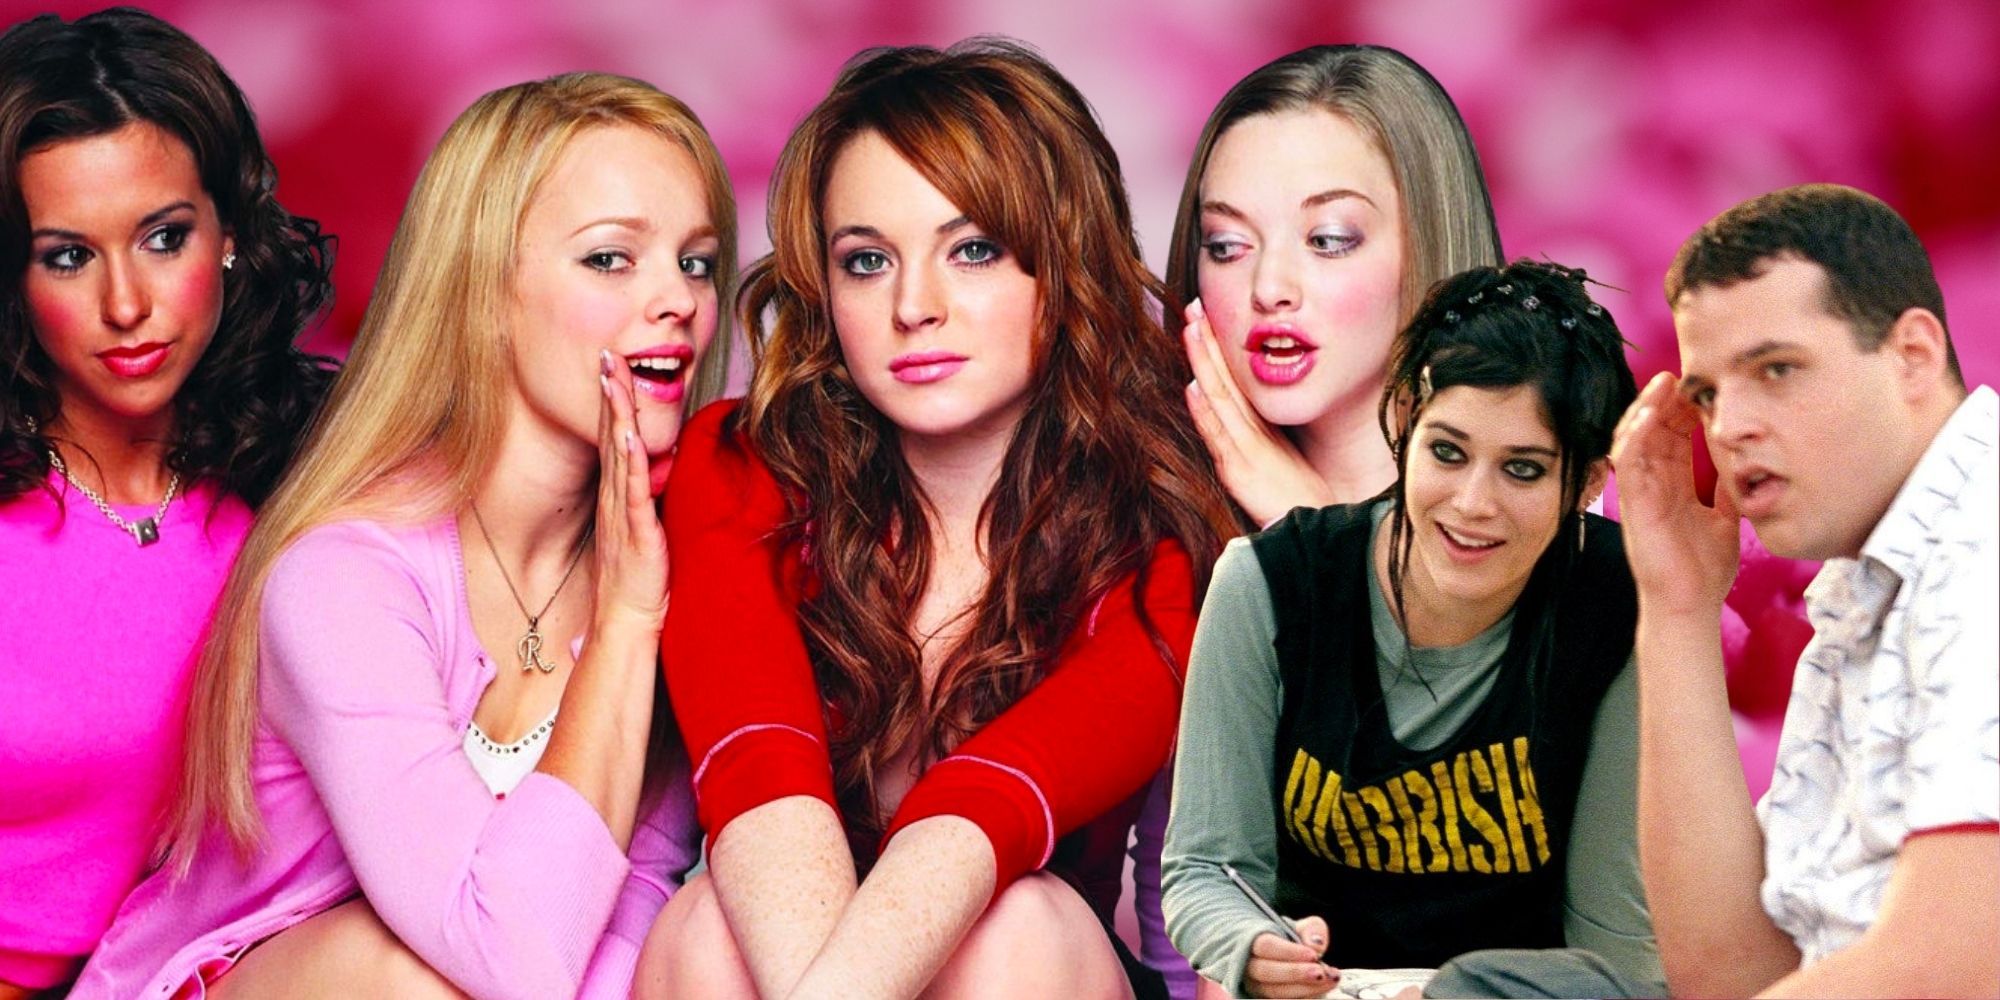 Mean Girls Lindsay Lohan and The Plastics with Janice and Damien watching